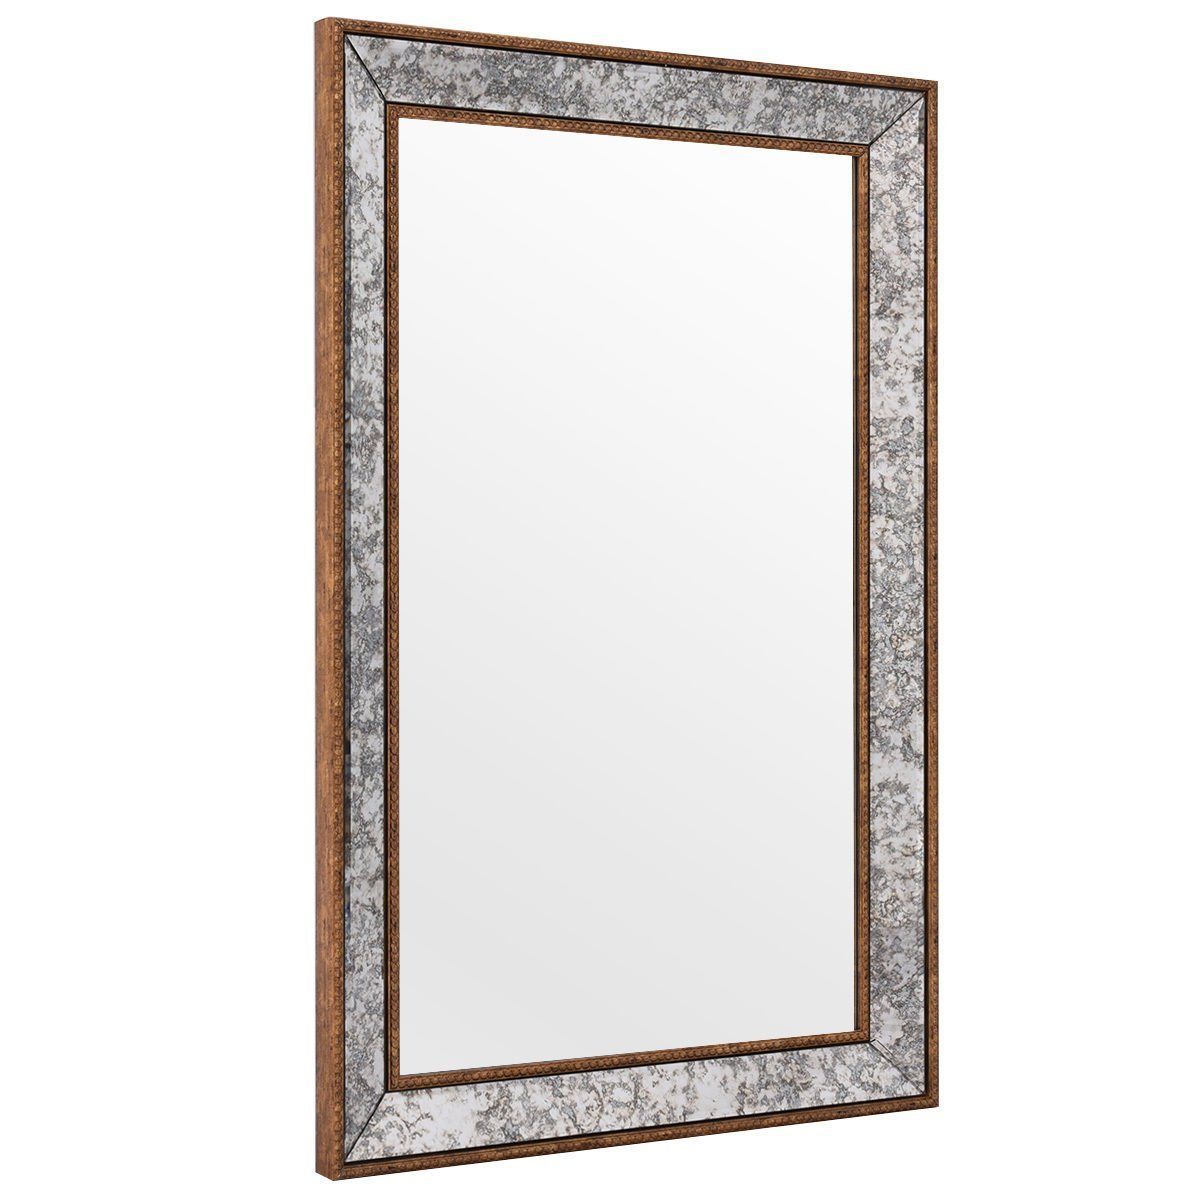 Tangkula 36' Wall Mirror Beveled Mirror Rectangle Bathroom Home Decor For Rounded Cut Edge Wall Mirrors (View 10 of 15)